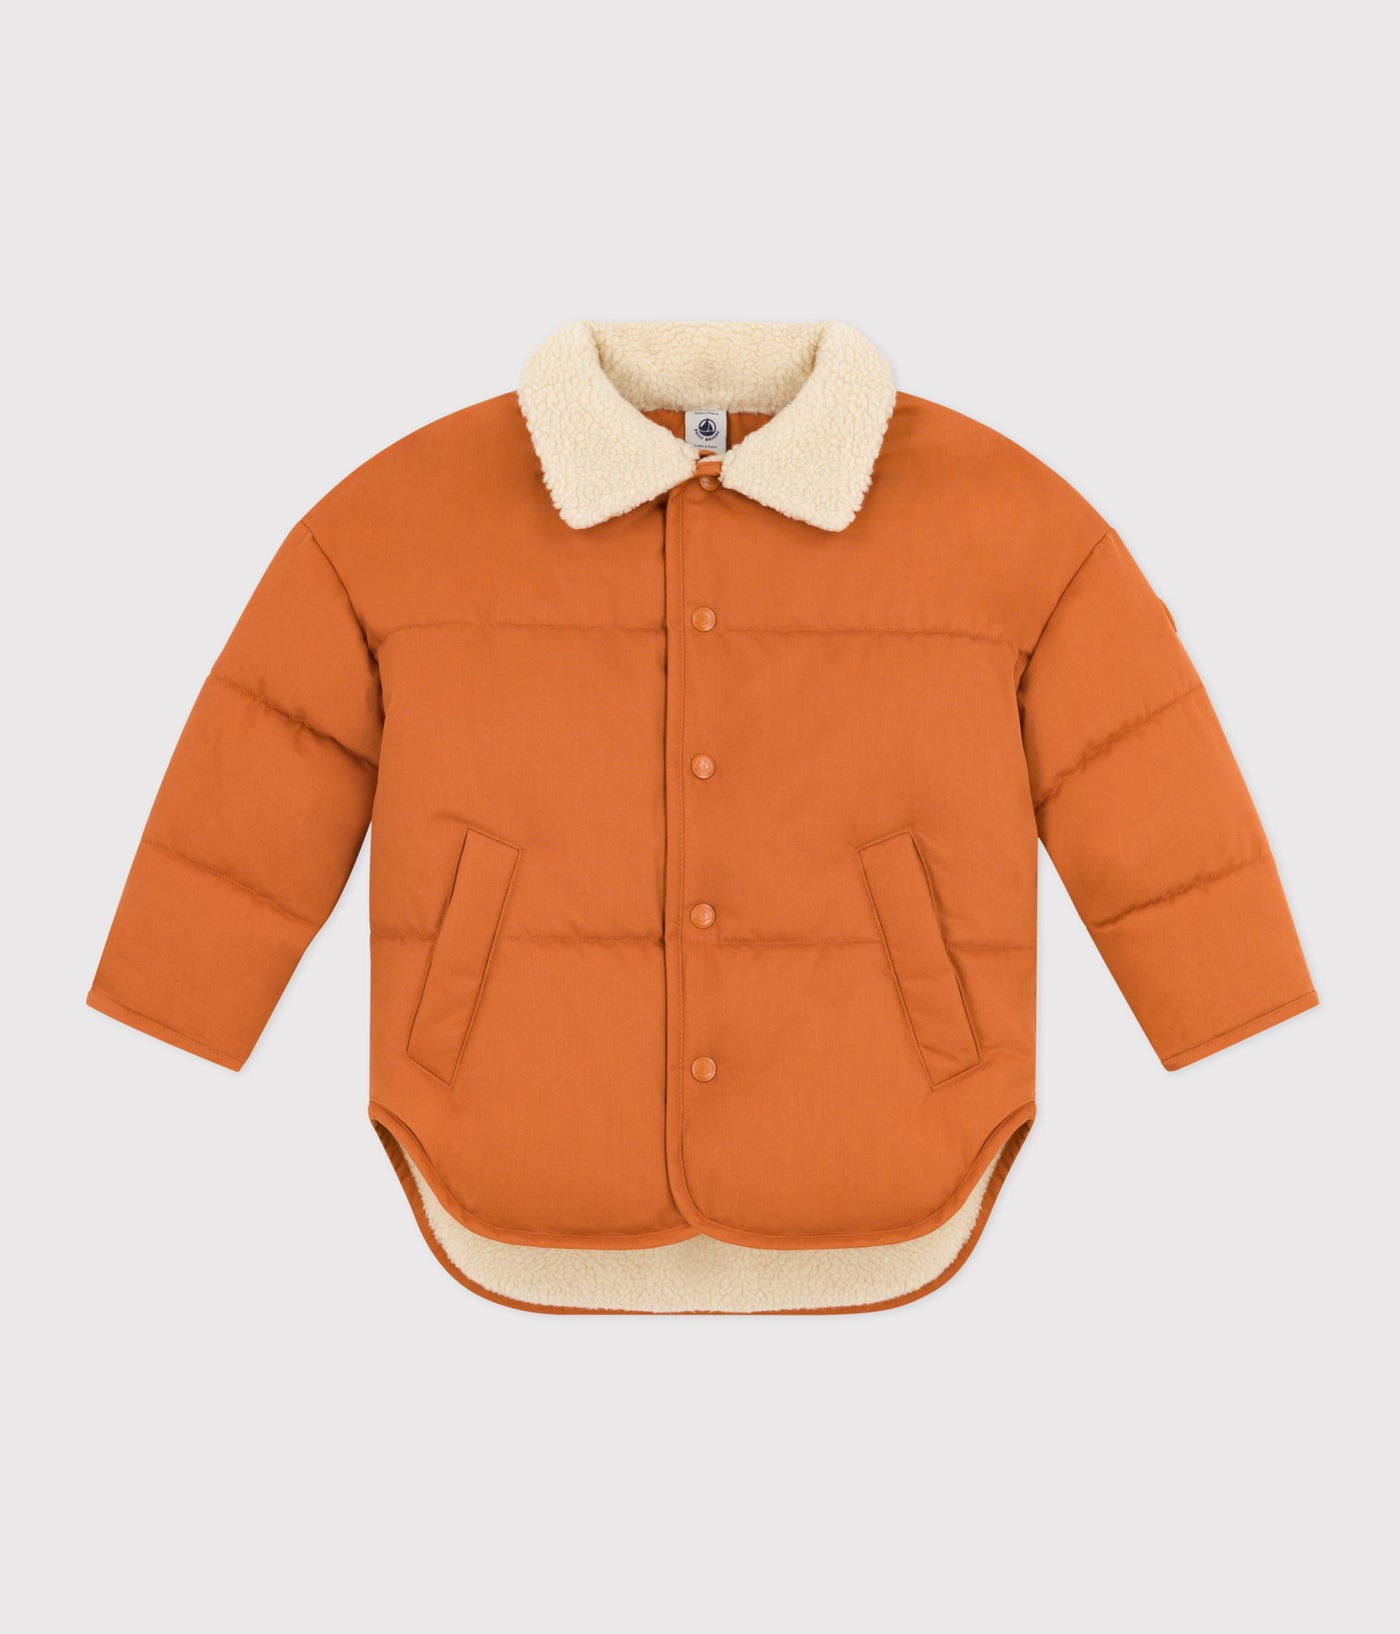 CHILDREN'S UNISEX SHORT JACKET LINED WITH SHERPA